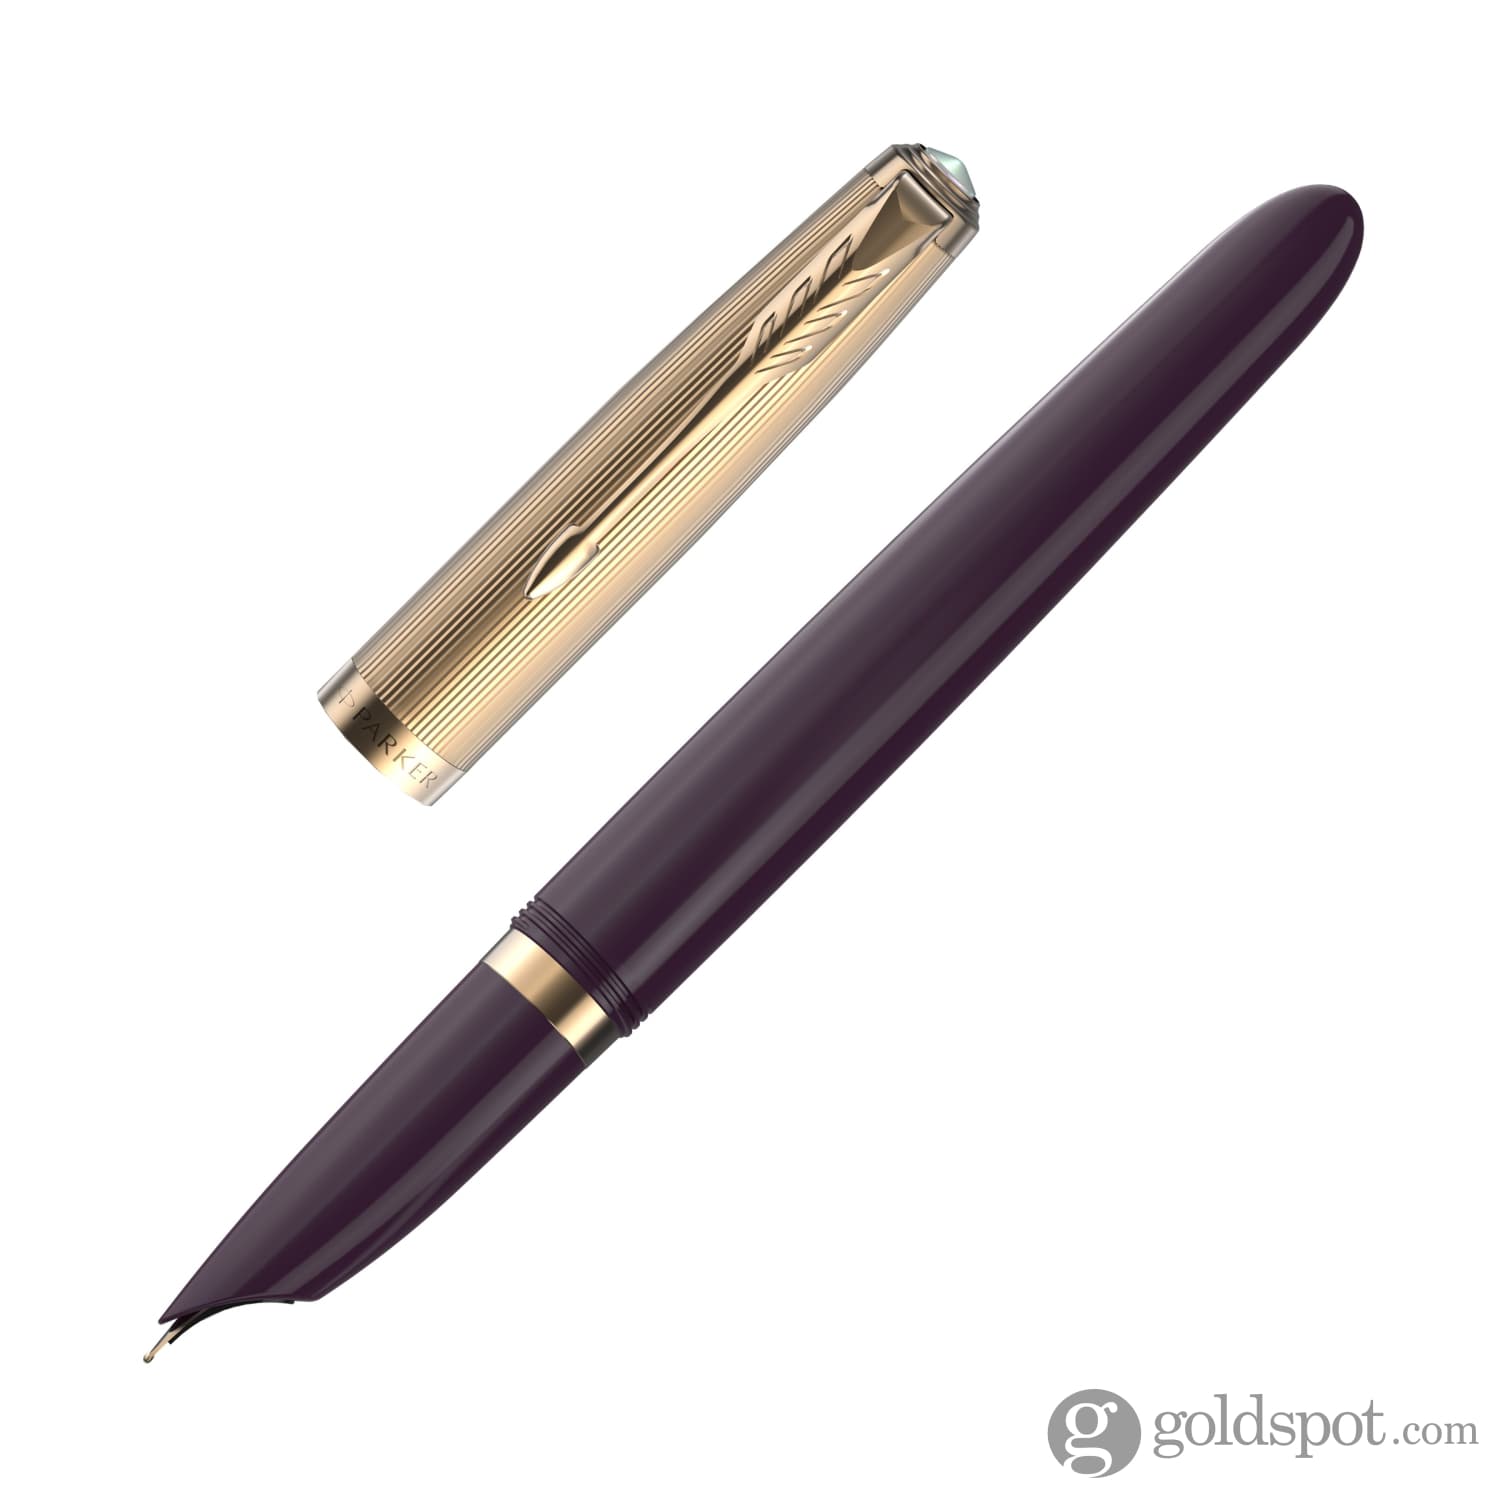 Parker 51 Fountain Pen in Plum with Gold Trim - 18K Gold